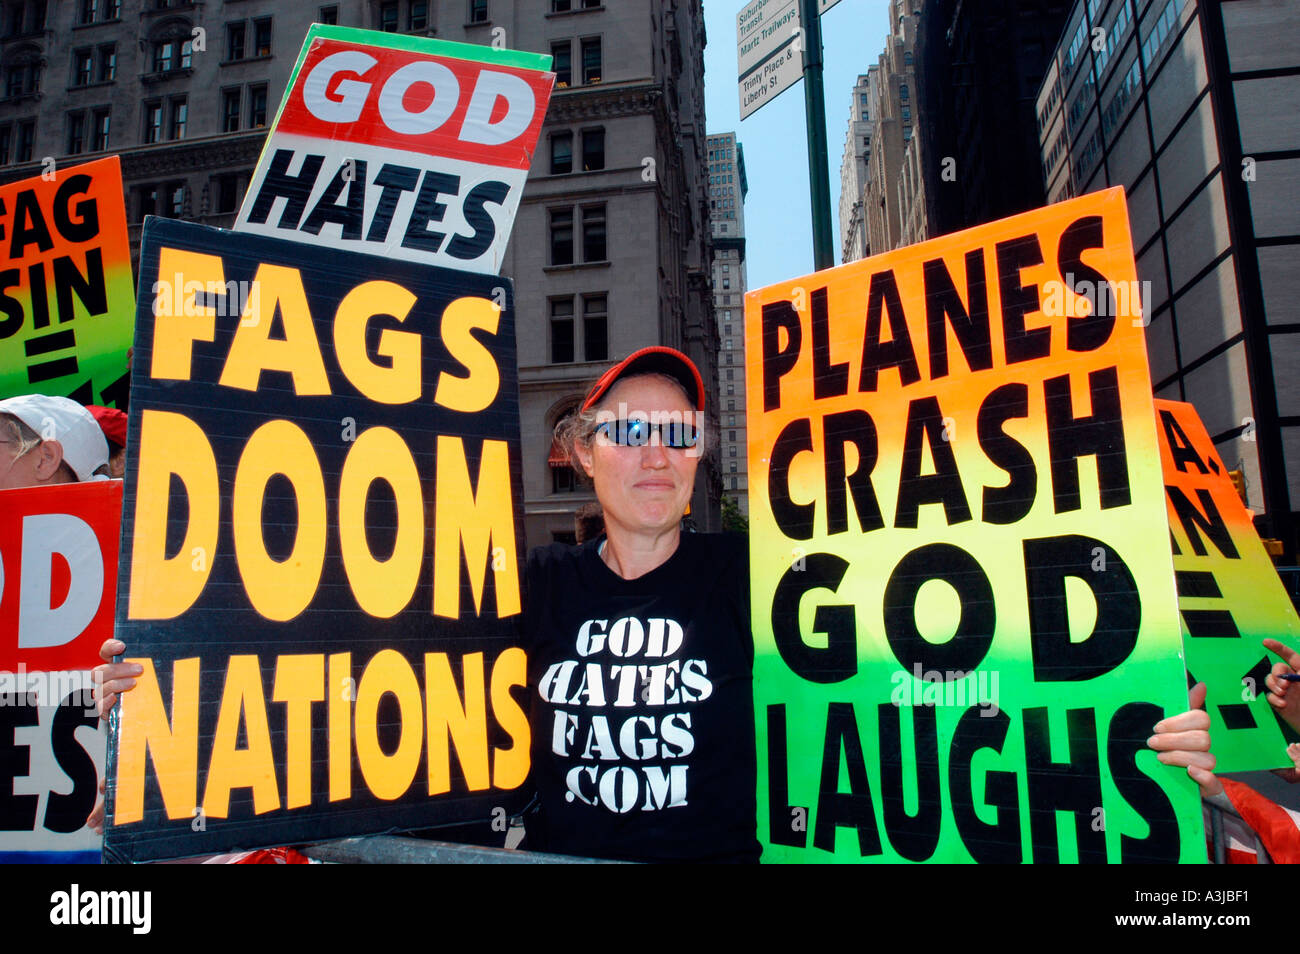 Members of the Westboro Baptist Church from Topeka Kansas demonstrate against homosexuality Stock Photo